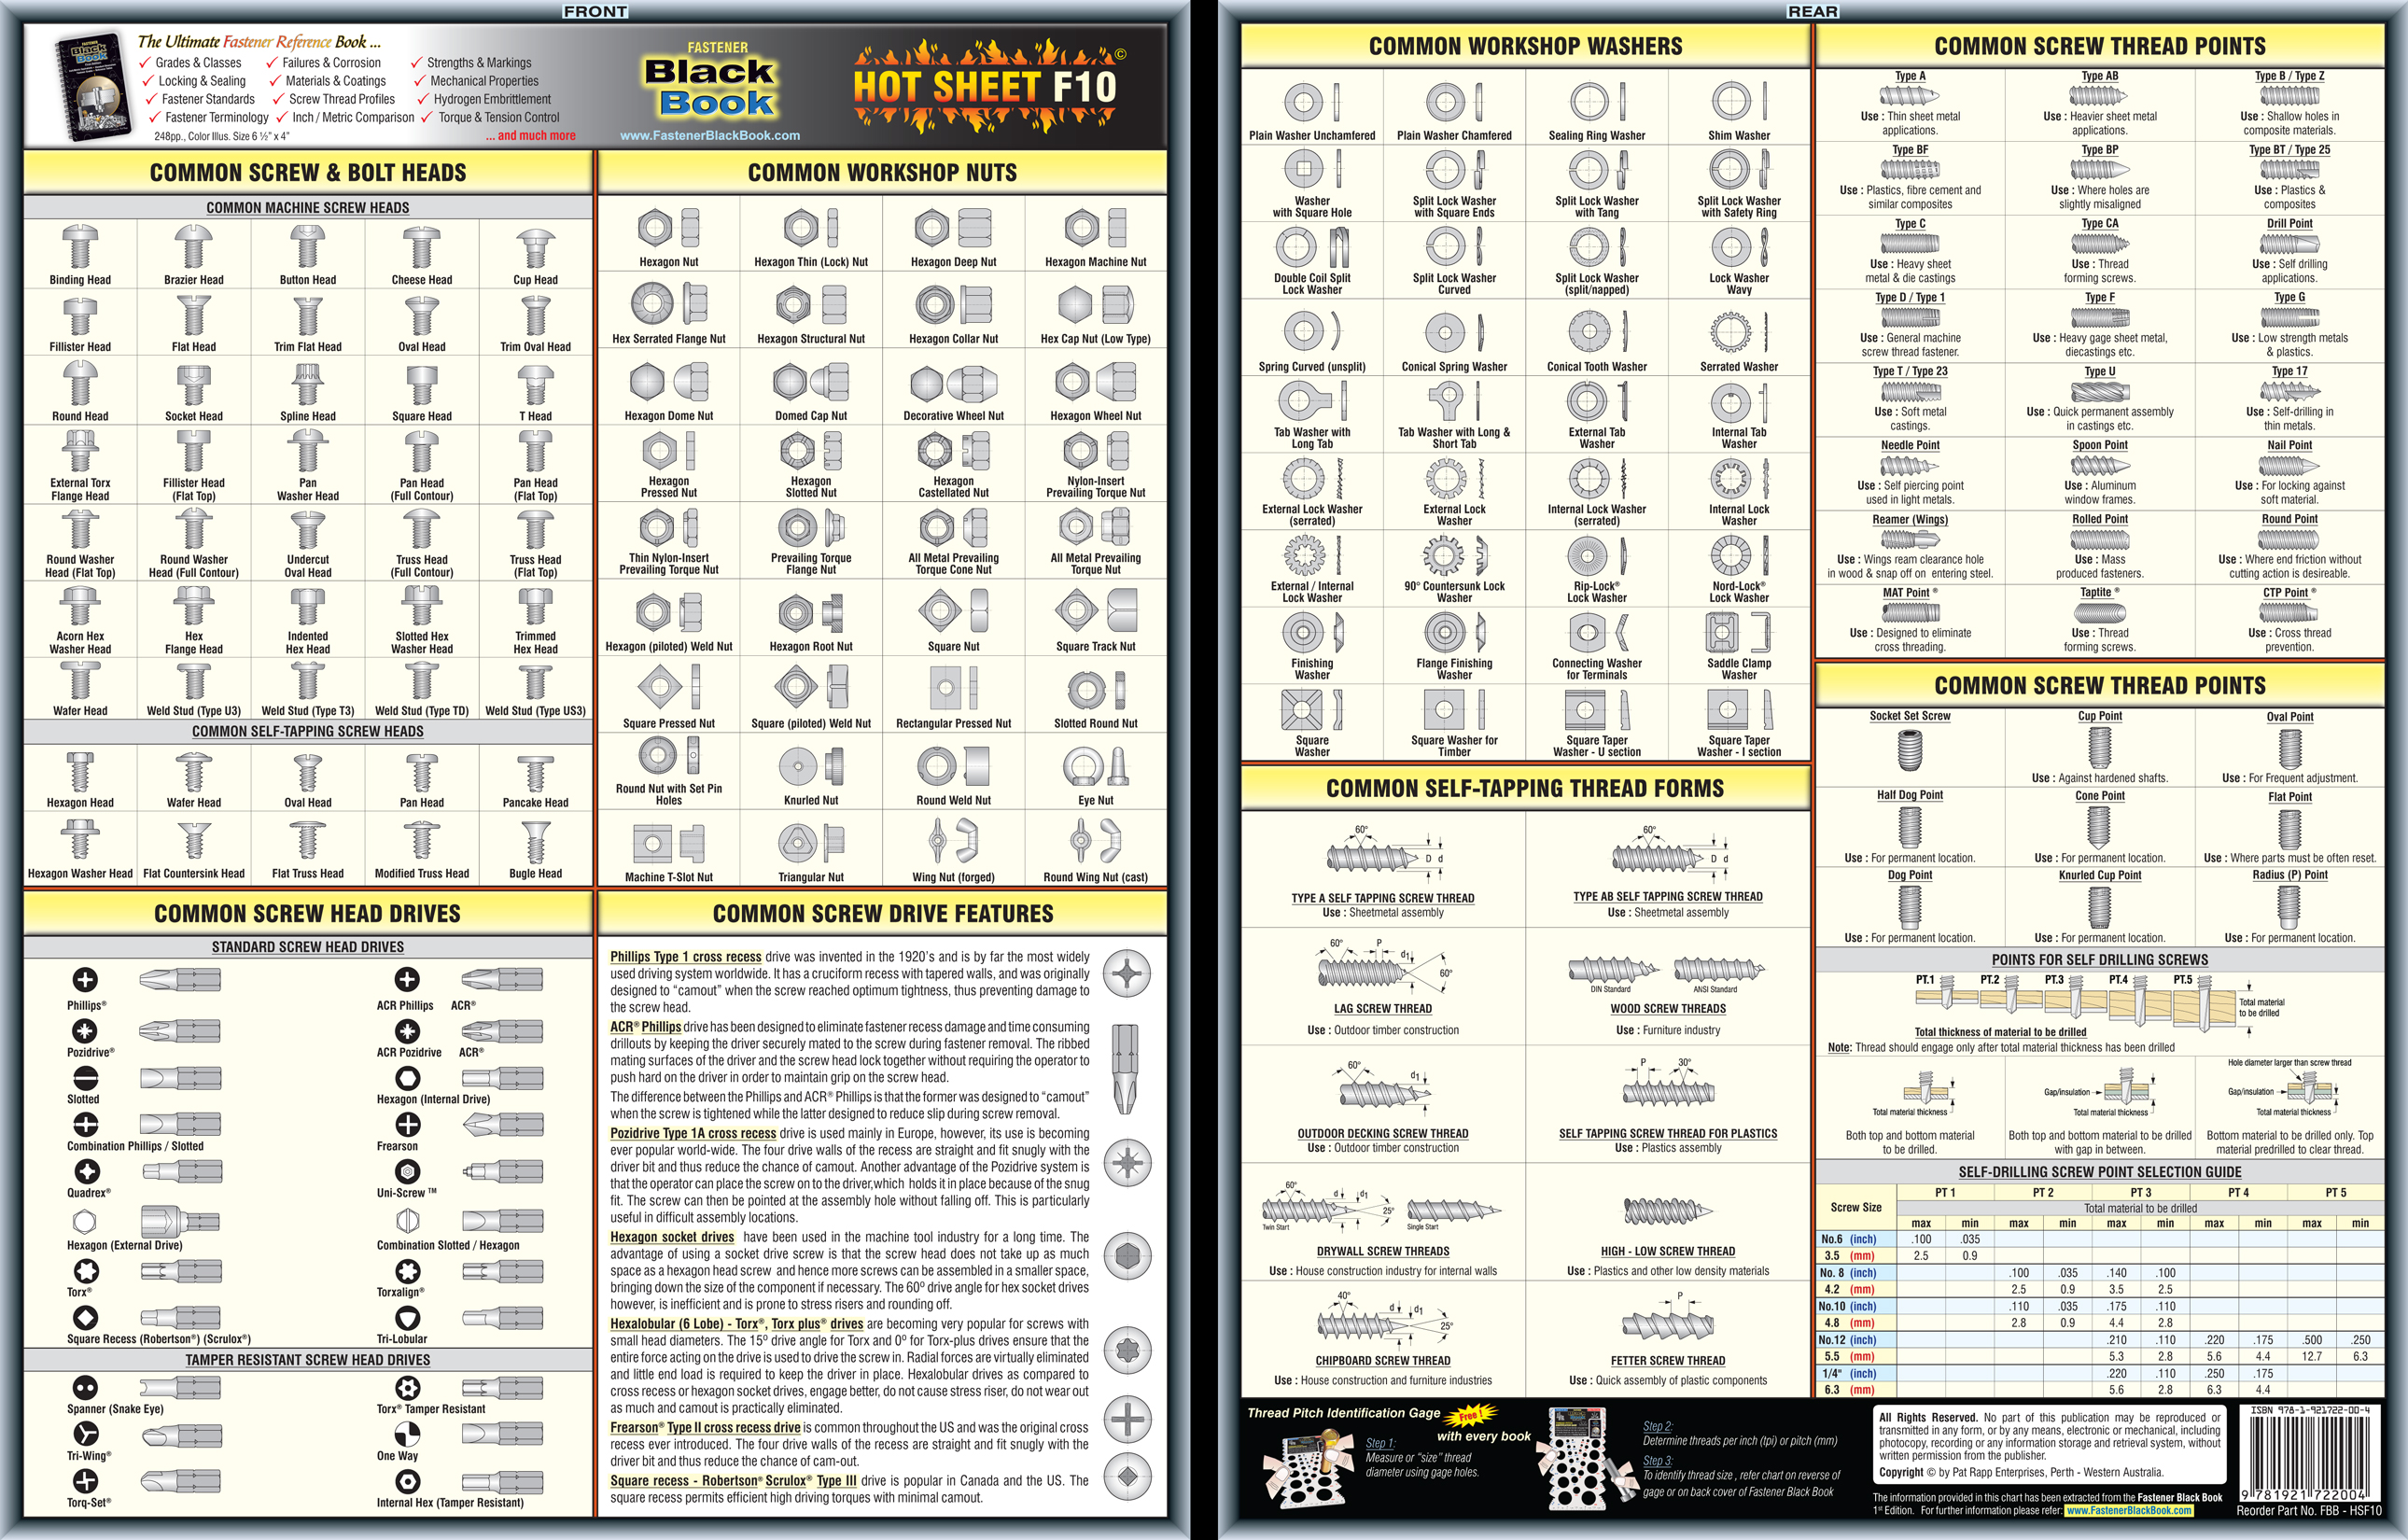 Where can you see a torque specs chart for bolts online?